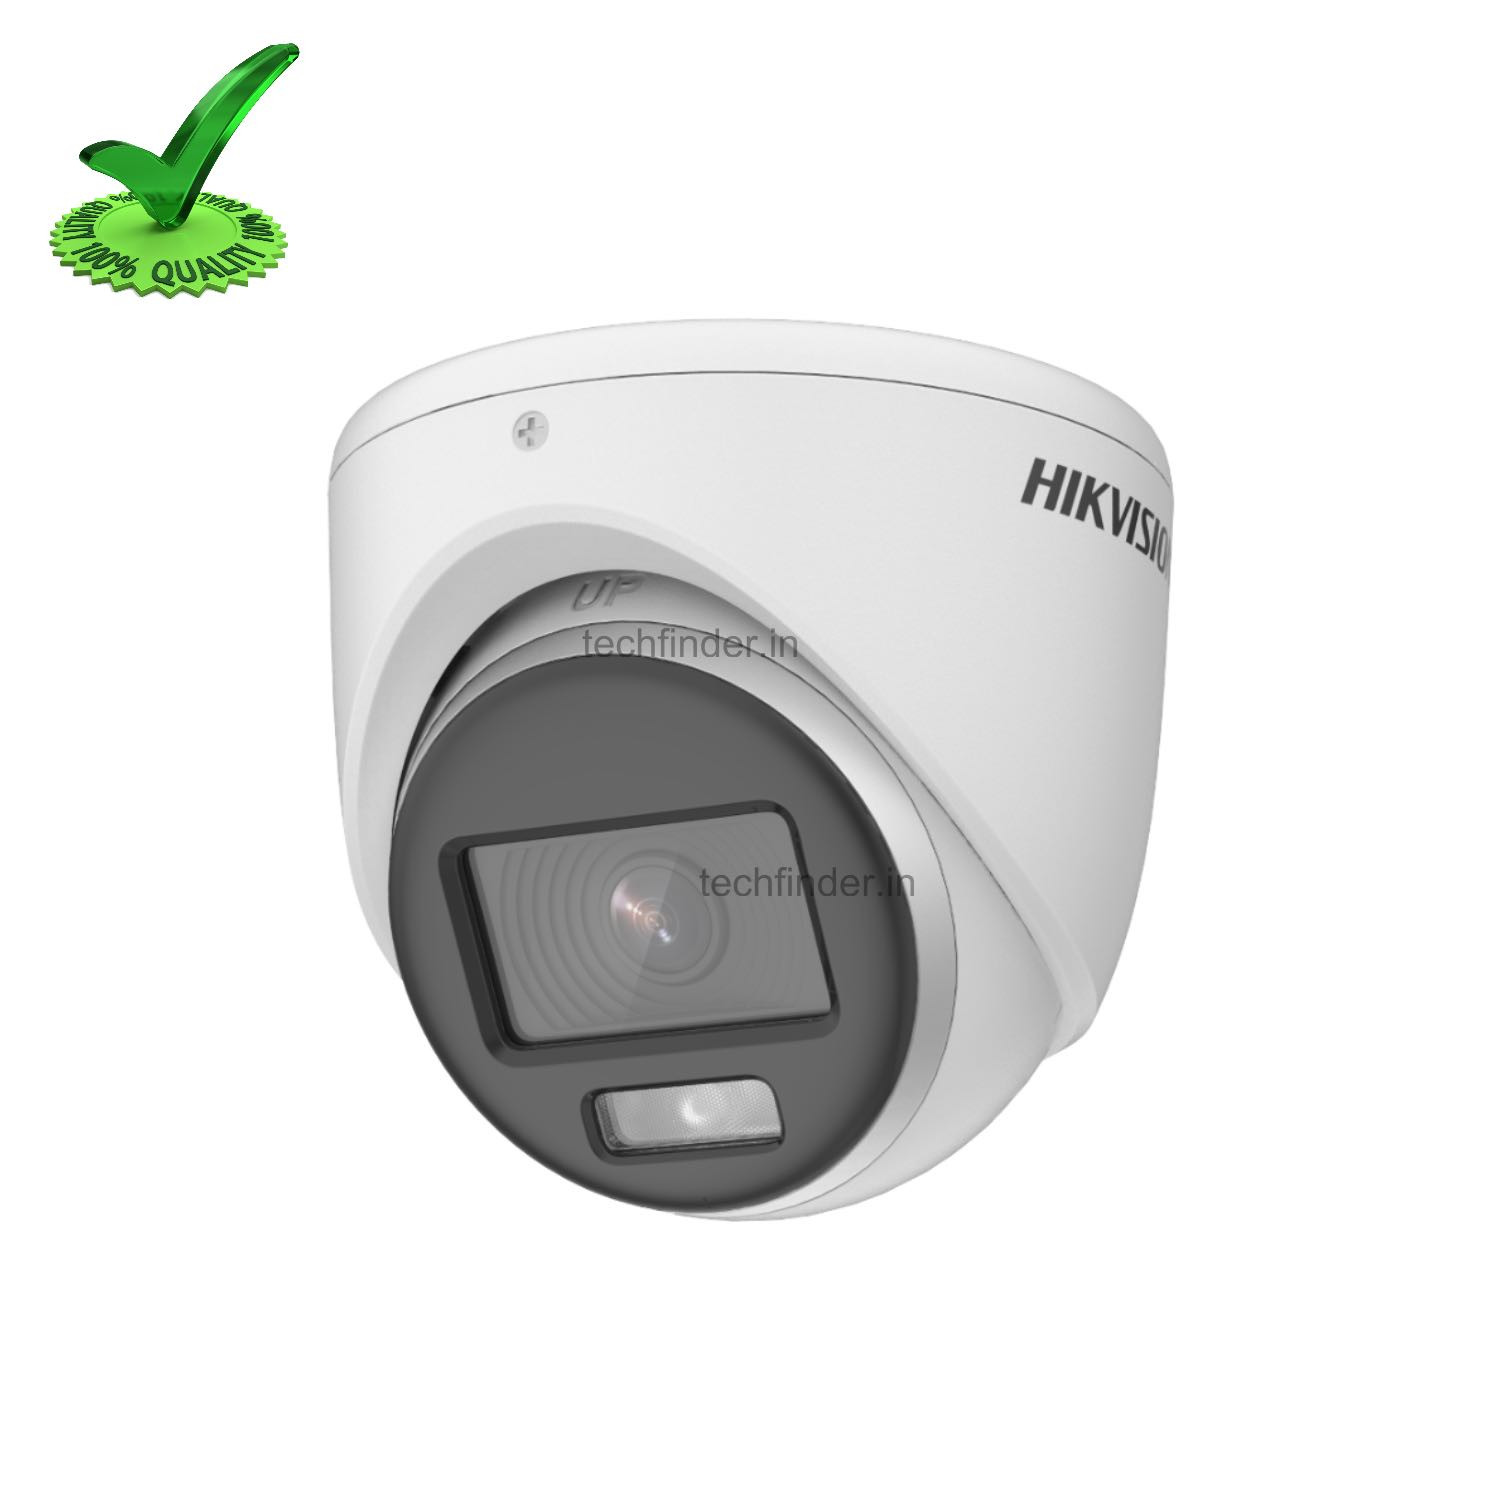 Hikvision DS-2CE70DF0T-PF 2MP HD Dome Camera